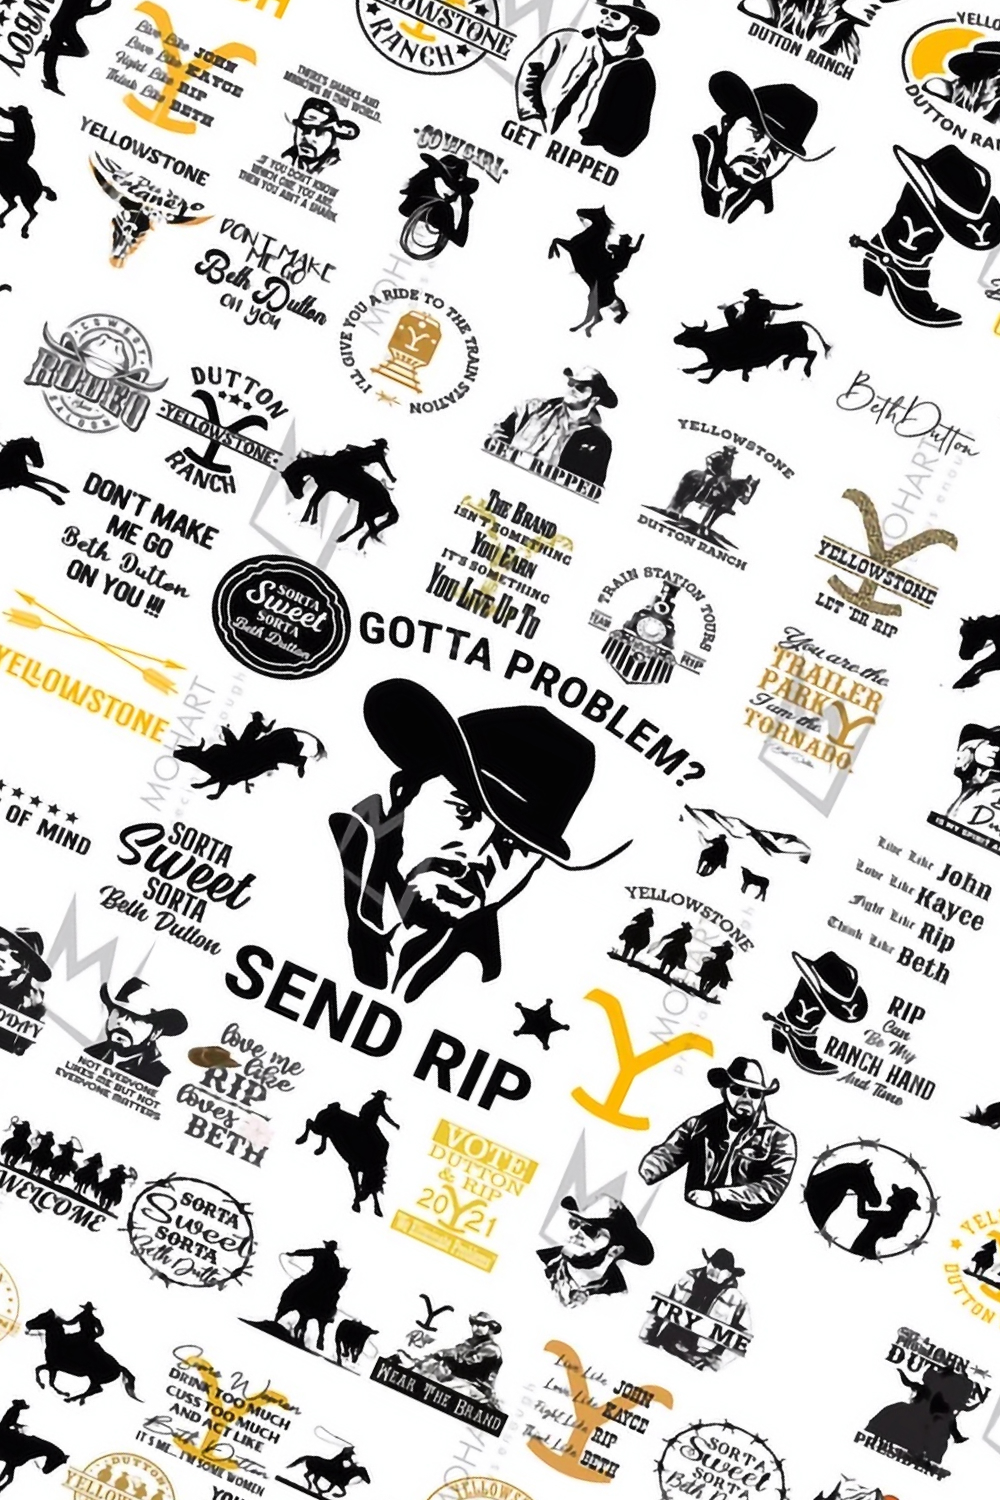 Yellow black color of sheriff theme images